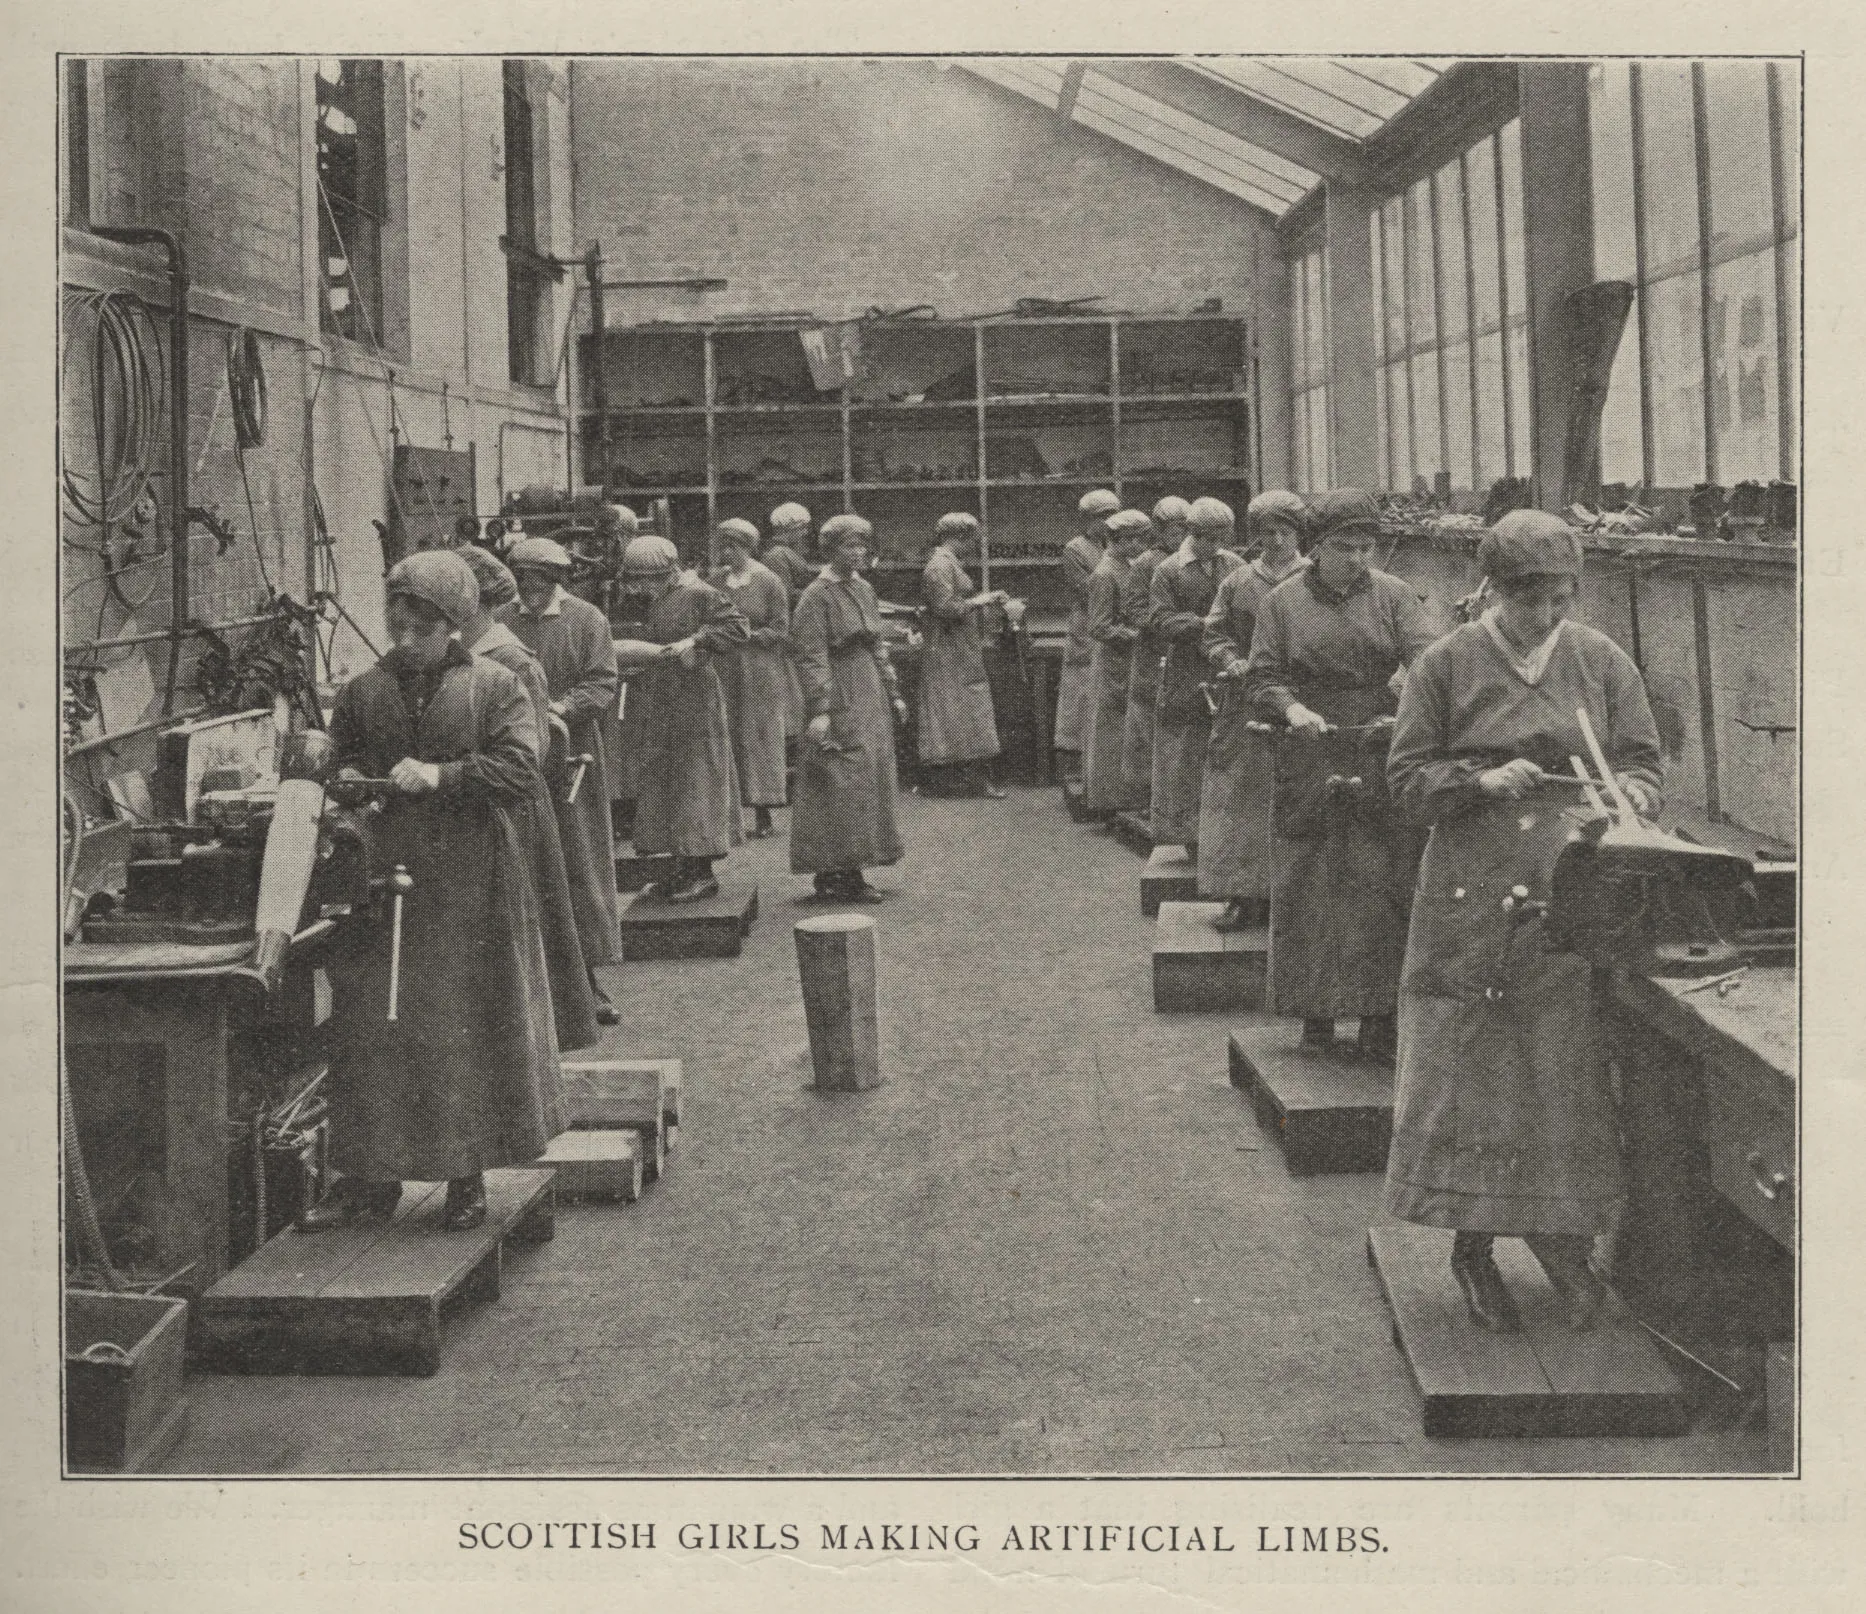 Image from The Woman Engineer Journal: Scottish girls making artificial limbs September 1920.